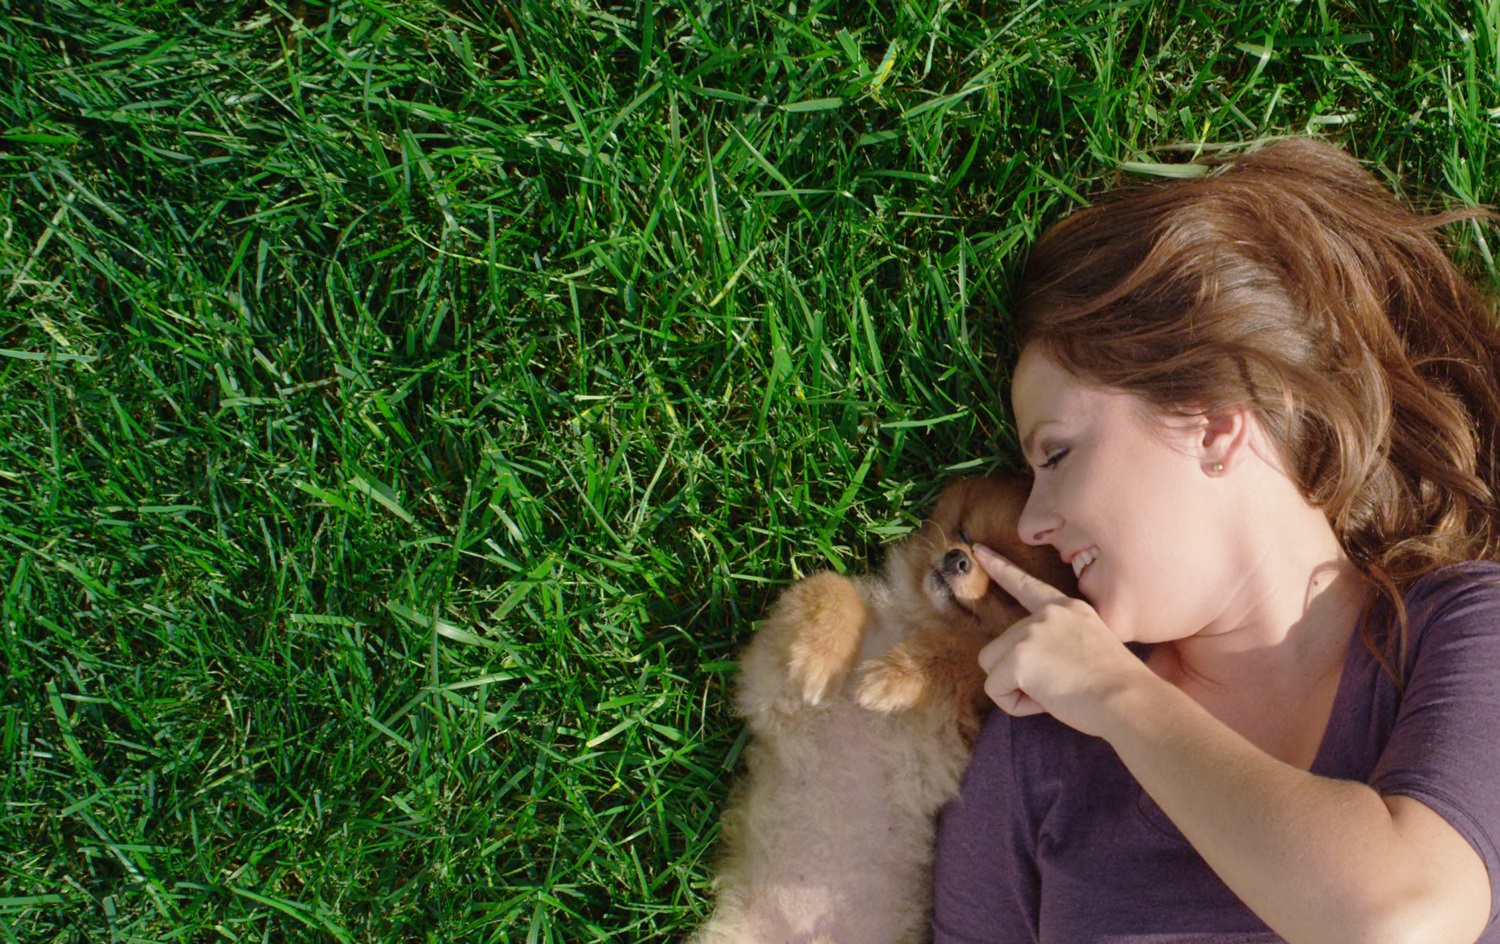 Pretty Woman playing with cute puppy on manicured green grass showing lawn care in Zionsville